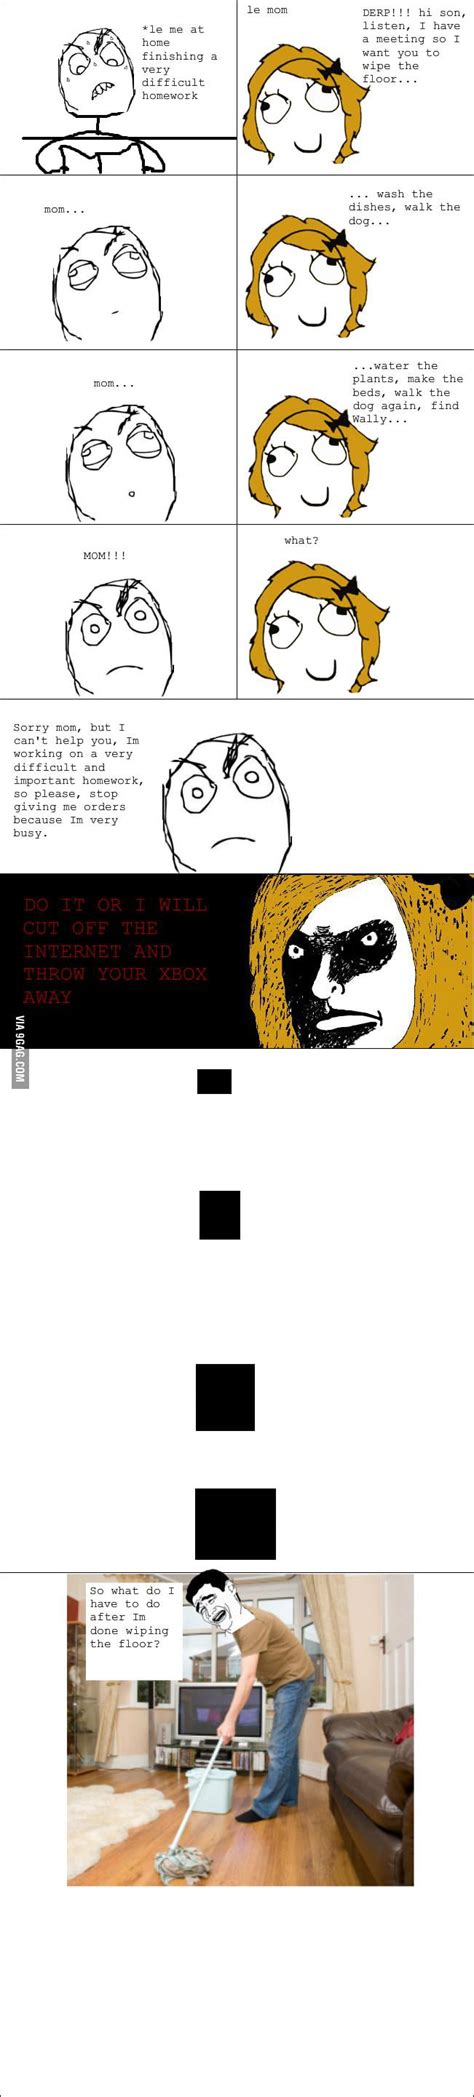 Dont Mess With Mom 9gag